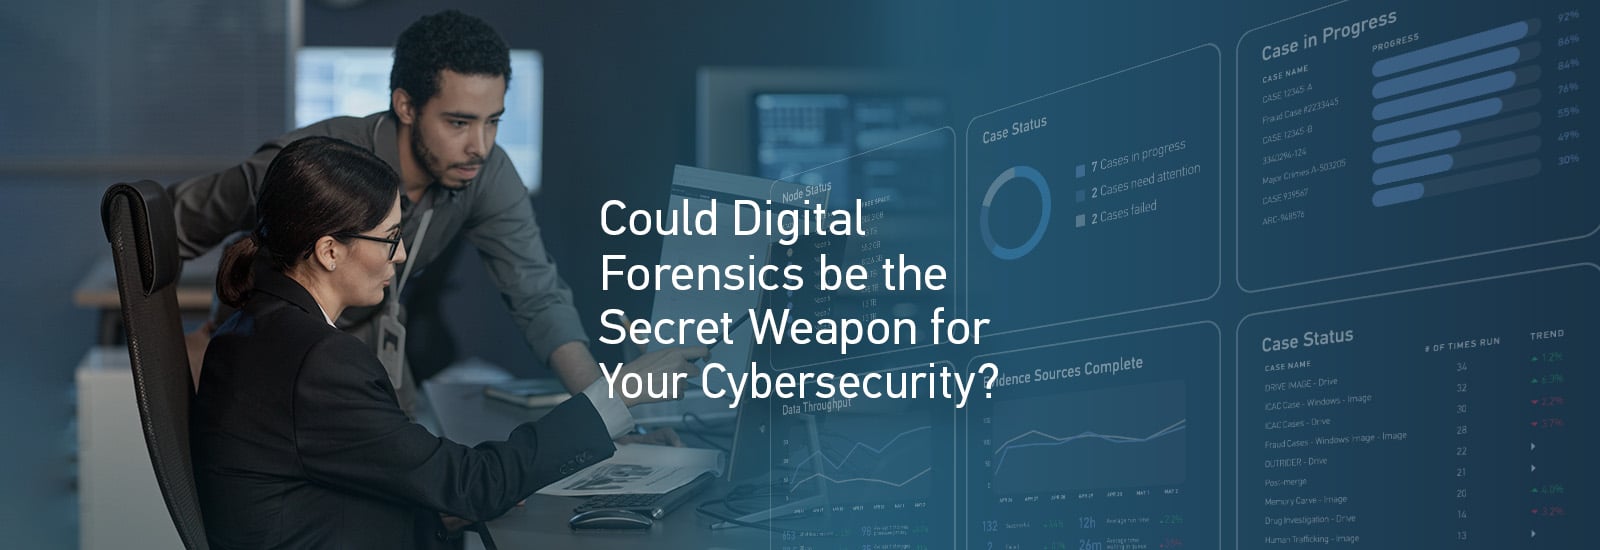 A decorative header for the post "A social media image for the blog post "Could Digital Forensics be the Secret Weapon for Your Cybersecurity?"